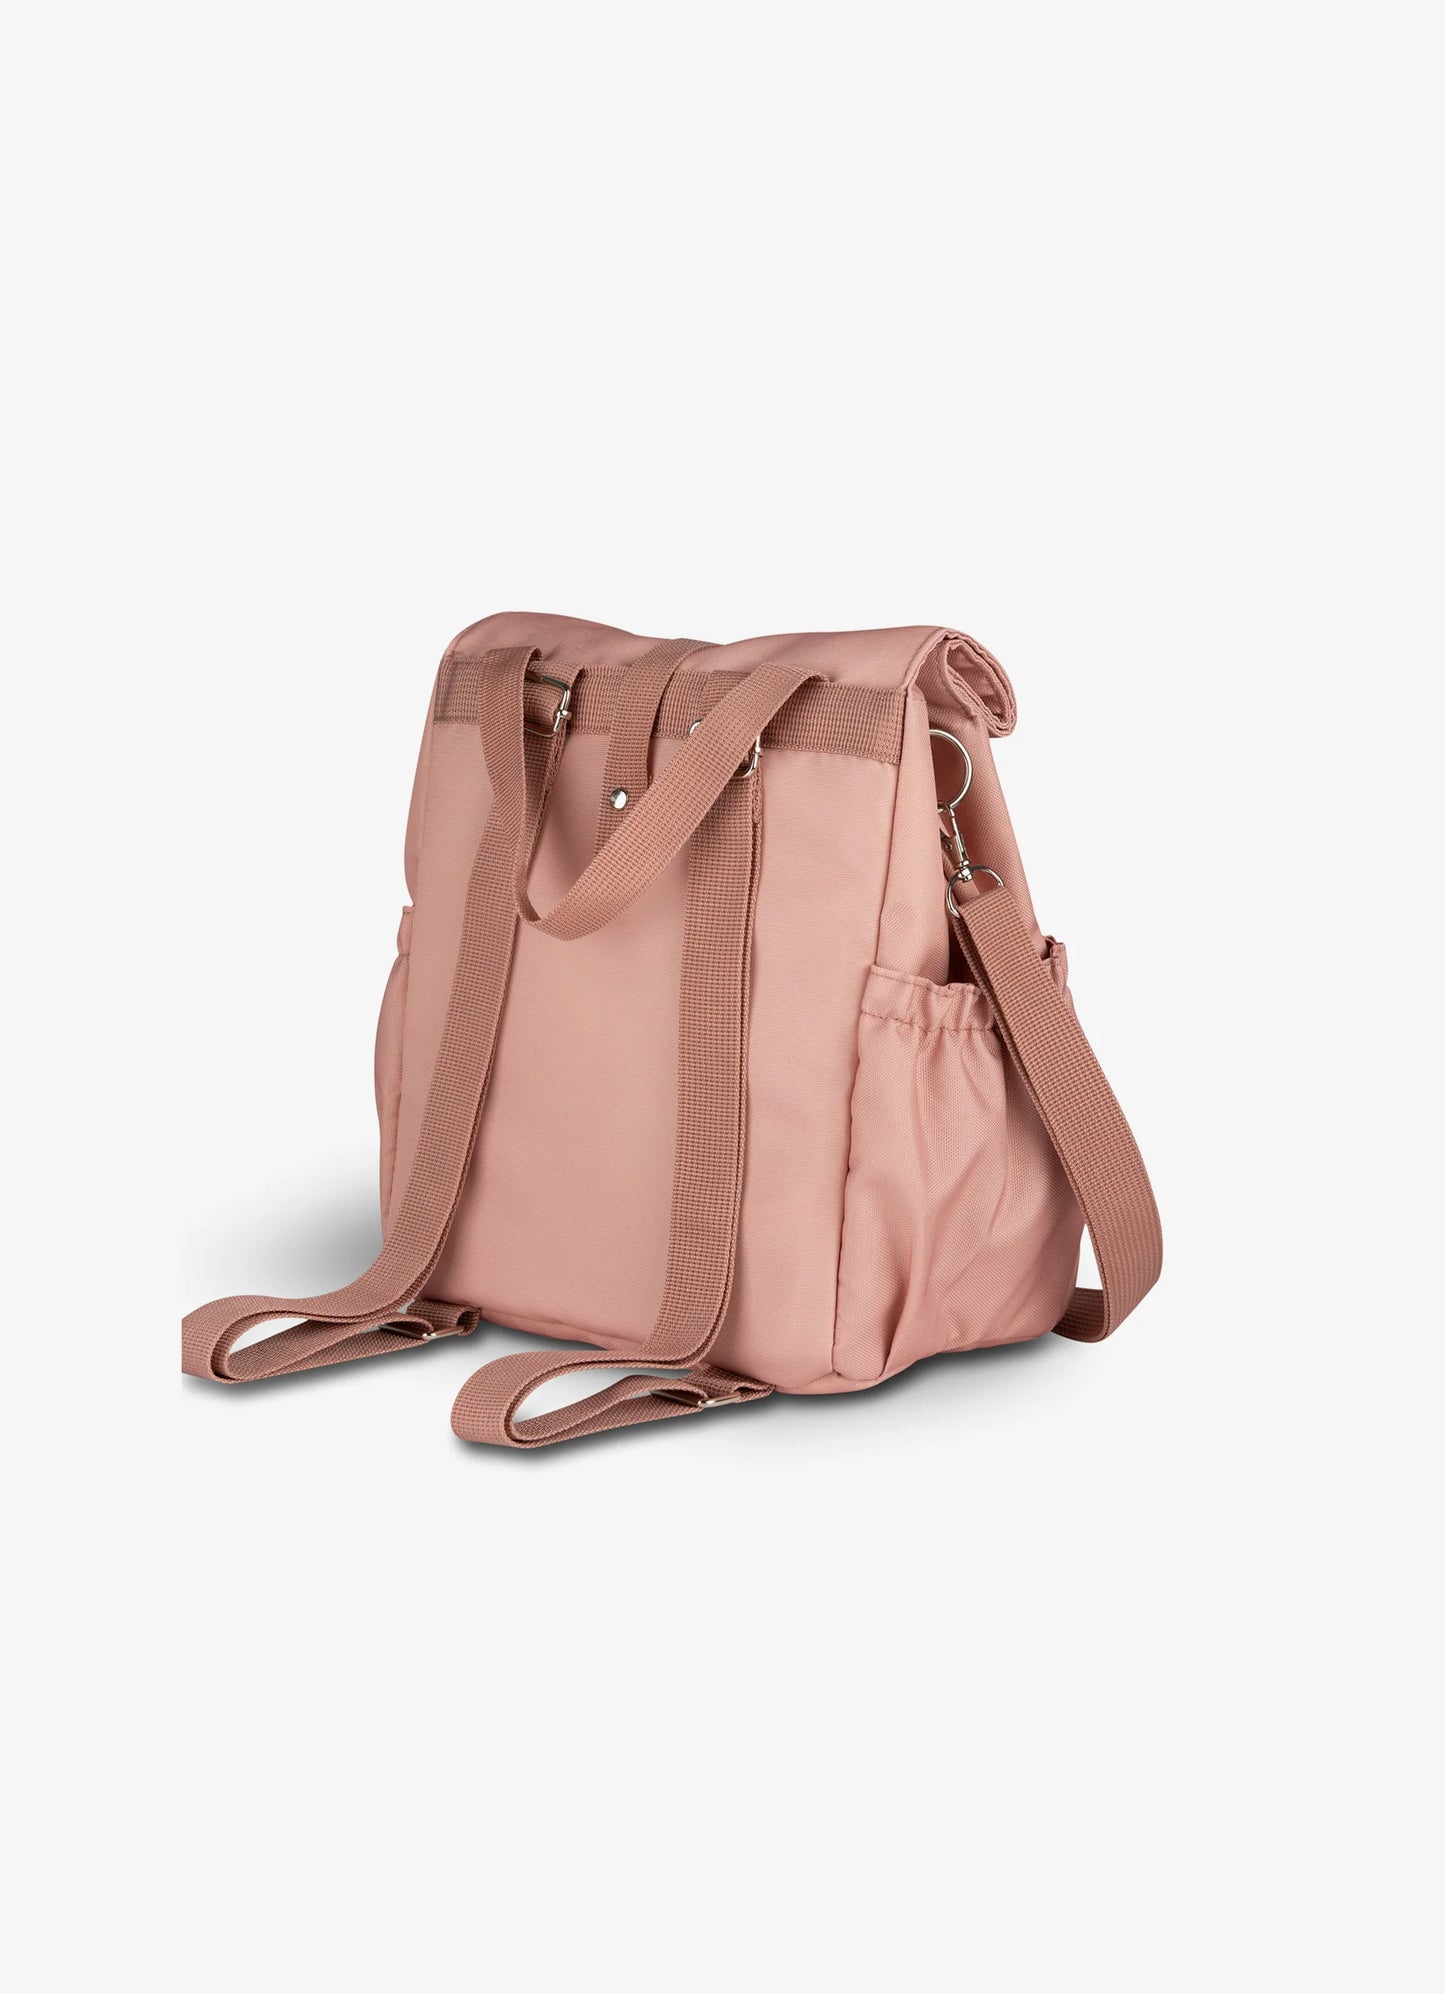 Rollup Thermal Lunchbag Pink